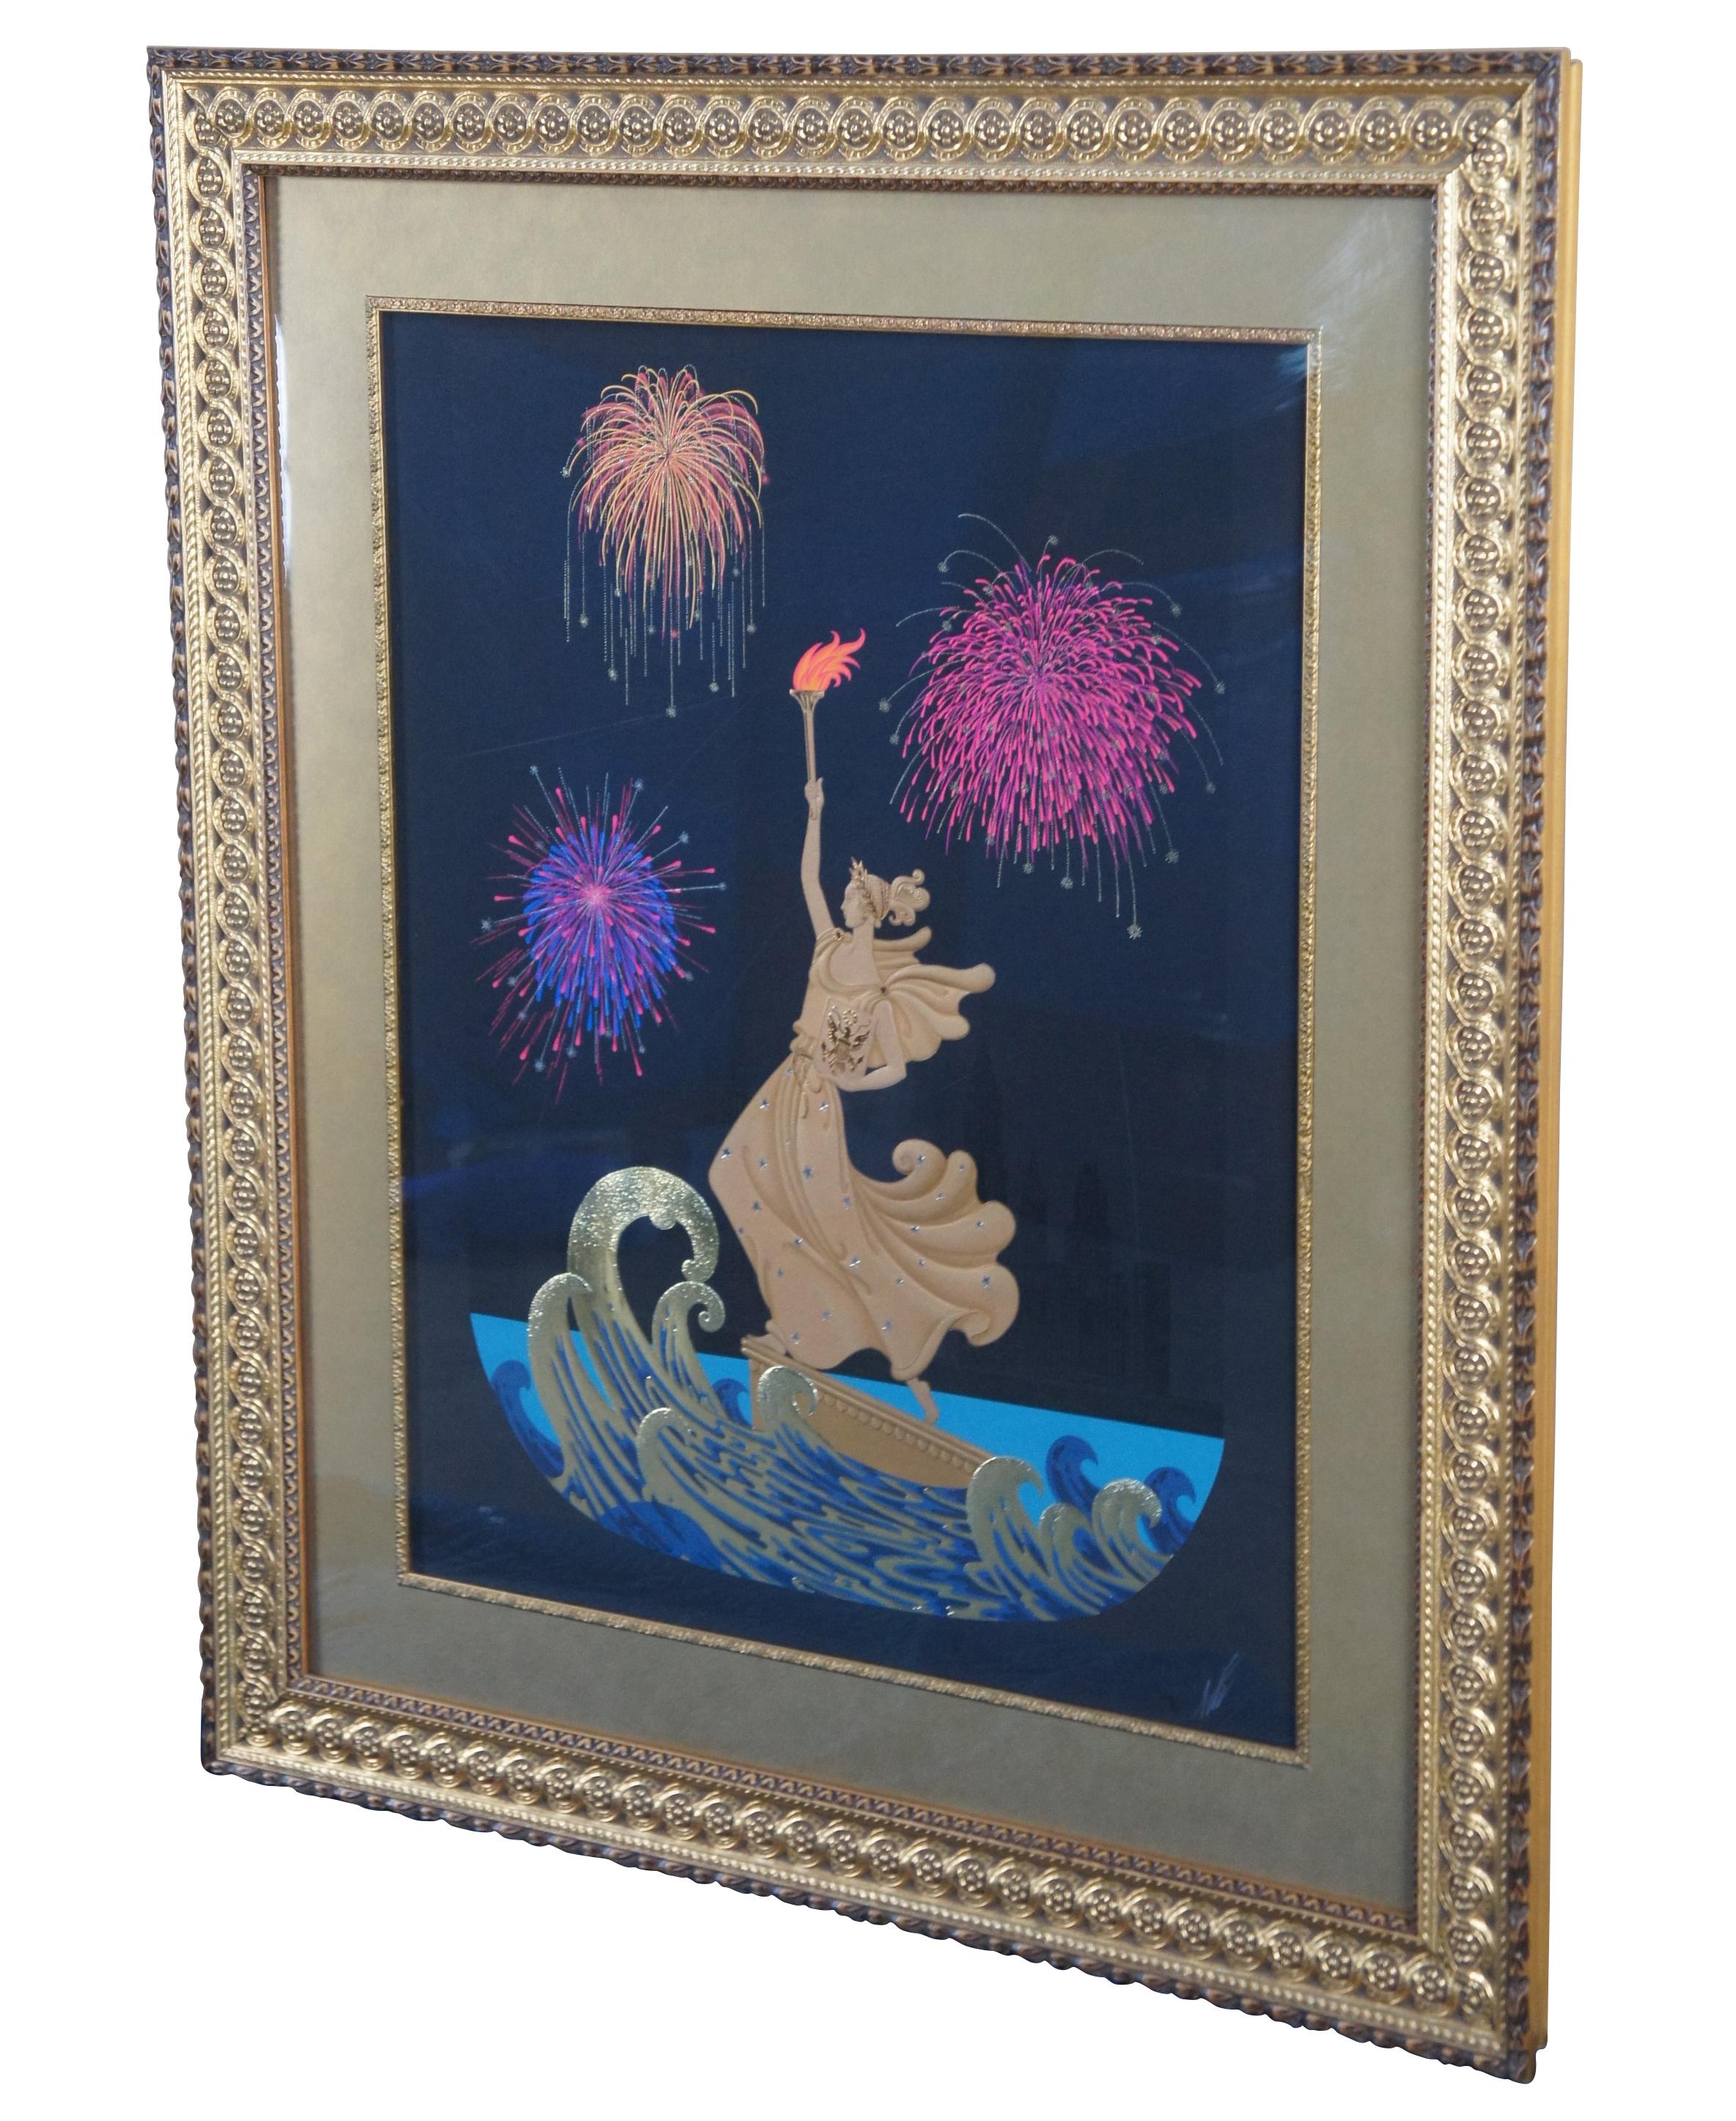 Vintage pair of embossed metallic Art Deco style serigraphs by Erte, circa 1986. The prints feature the famous Statue of Liberty in both day and night settings. The day print features a seascape with her majesty surfing the waves with her